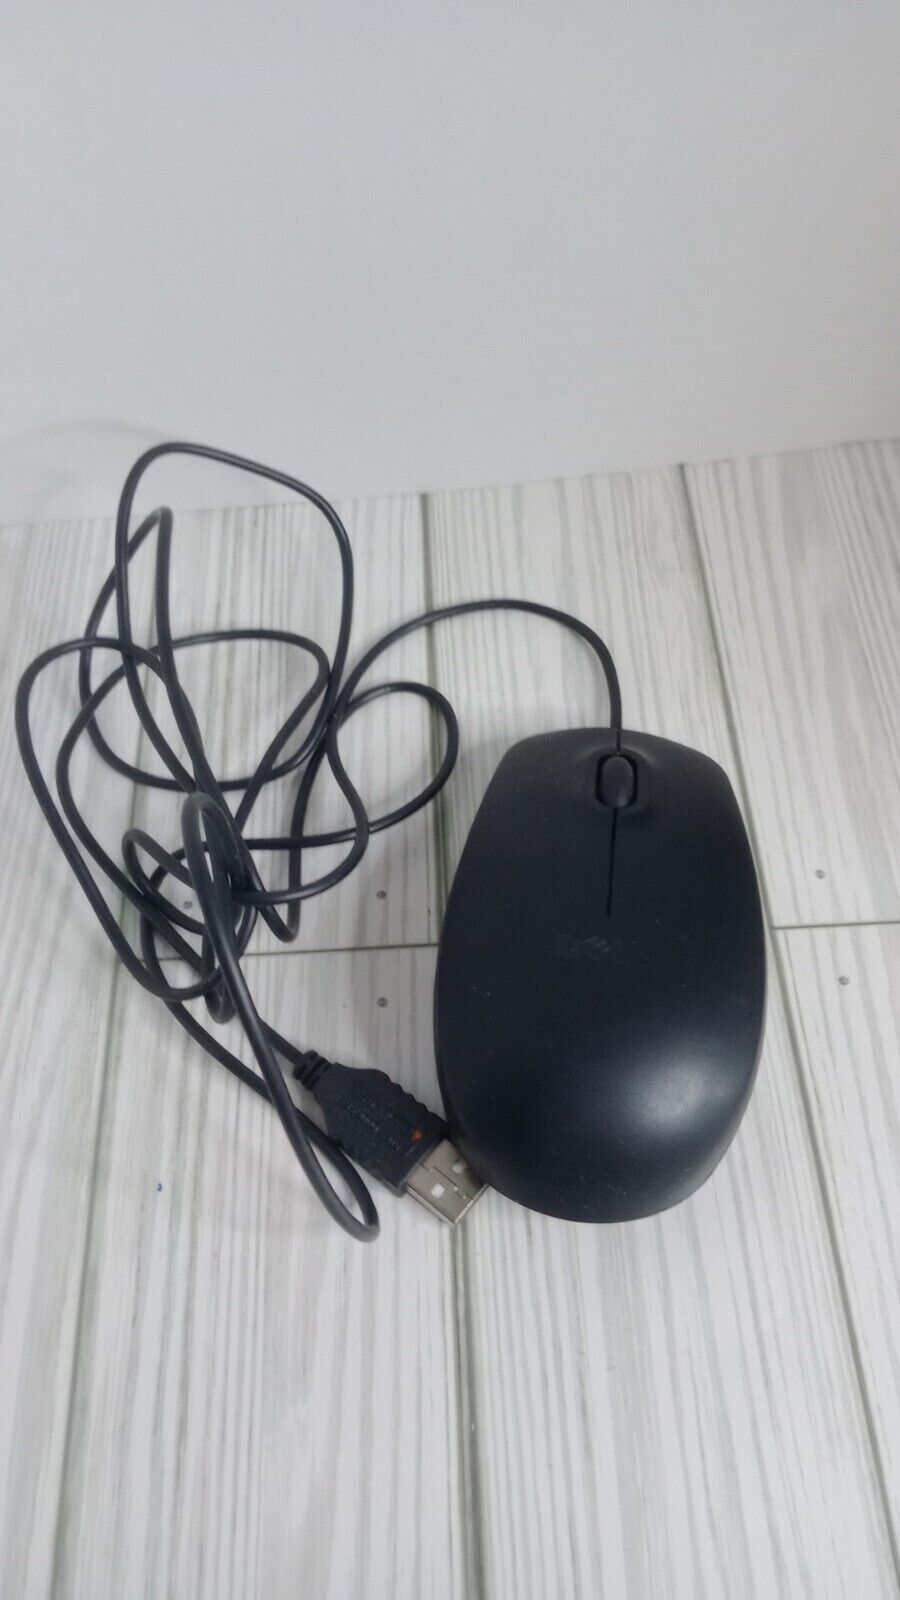 Dell MS-111-P Wired Mouse - Black - Precision Tracking